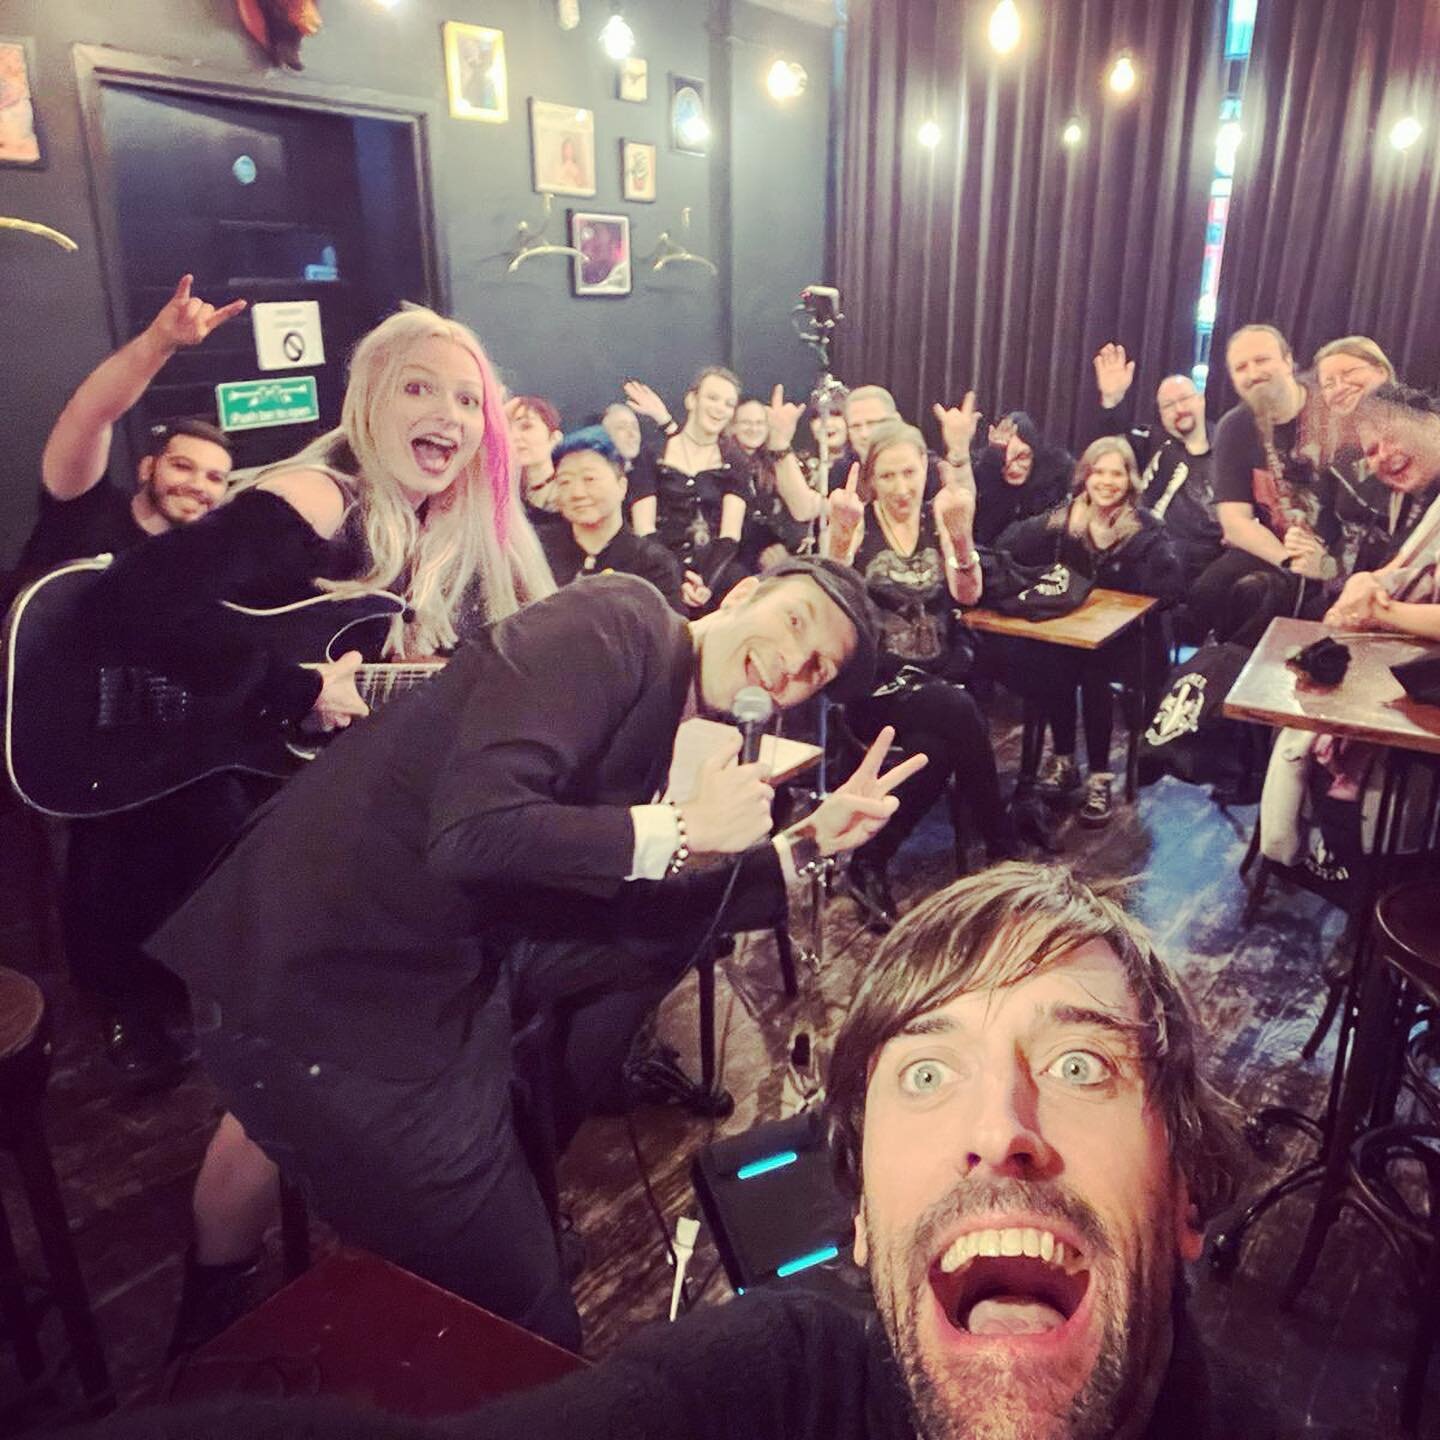 We&rsquo;ve been having an absolute ball celebrating our own funeral on this run. Flashback to the ceremony in London where we improvised last minute in the bar beside the venue. It&rsquo;s been a joy honoring our last headlining tour with all of you